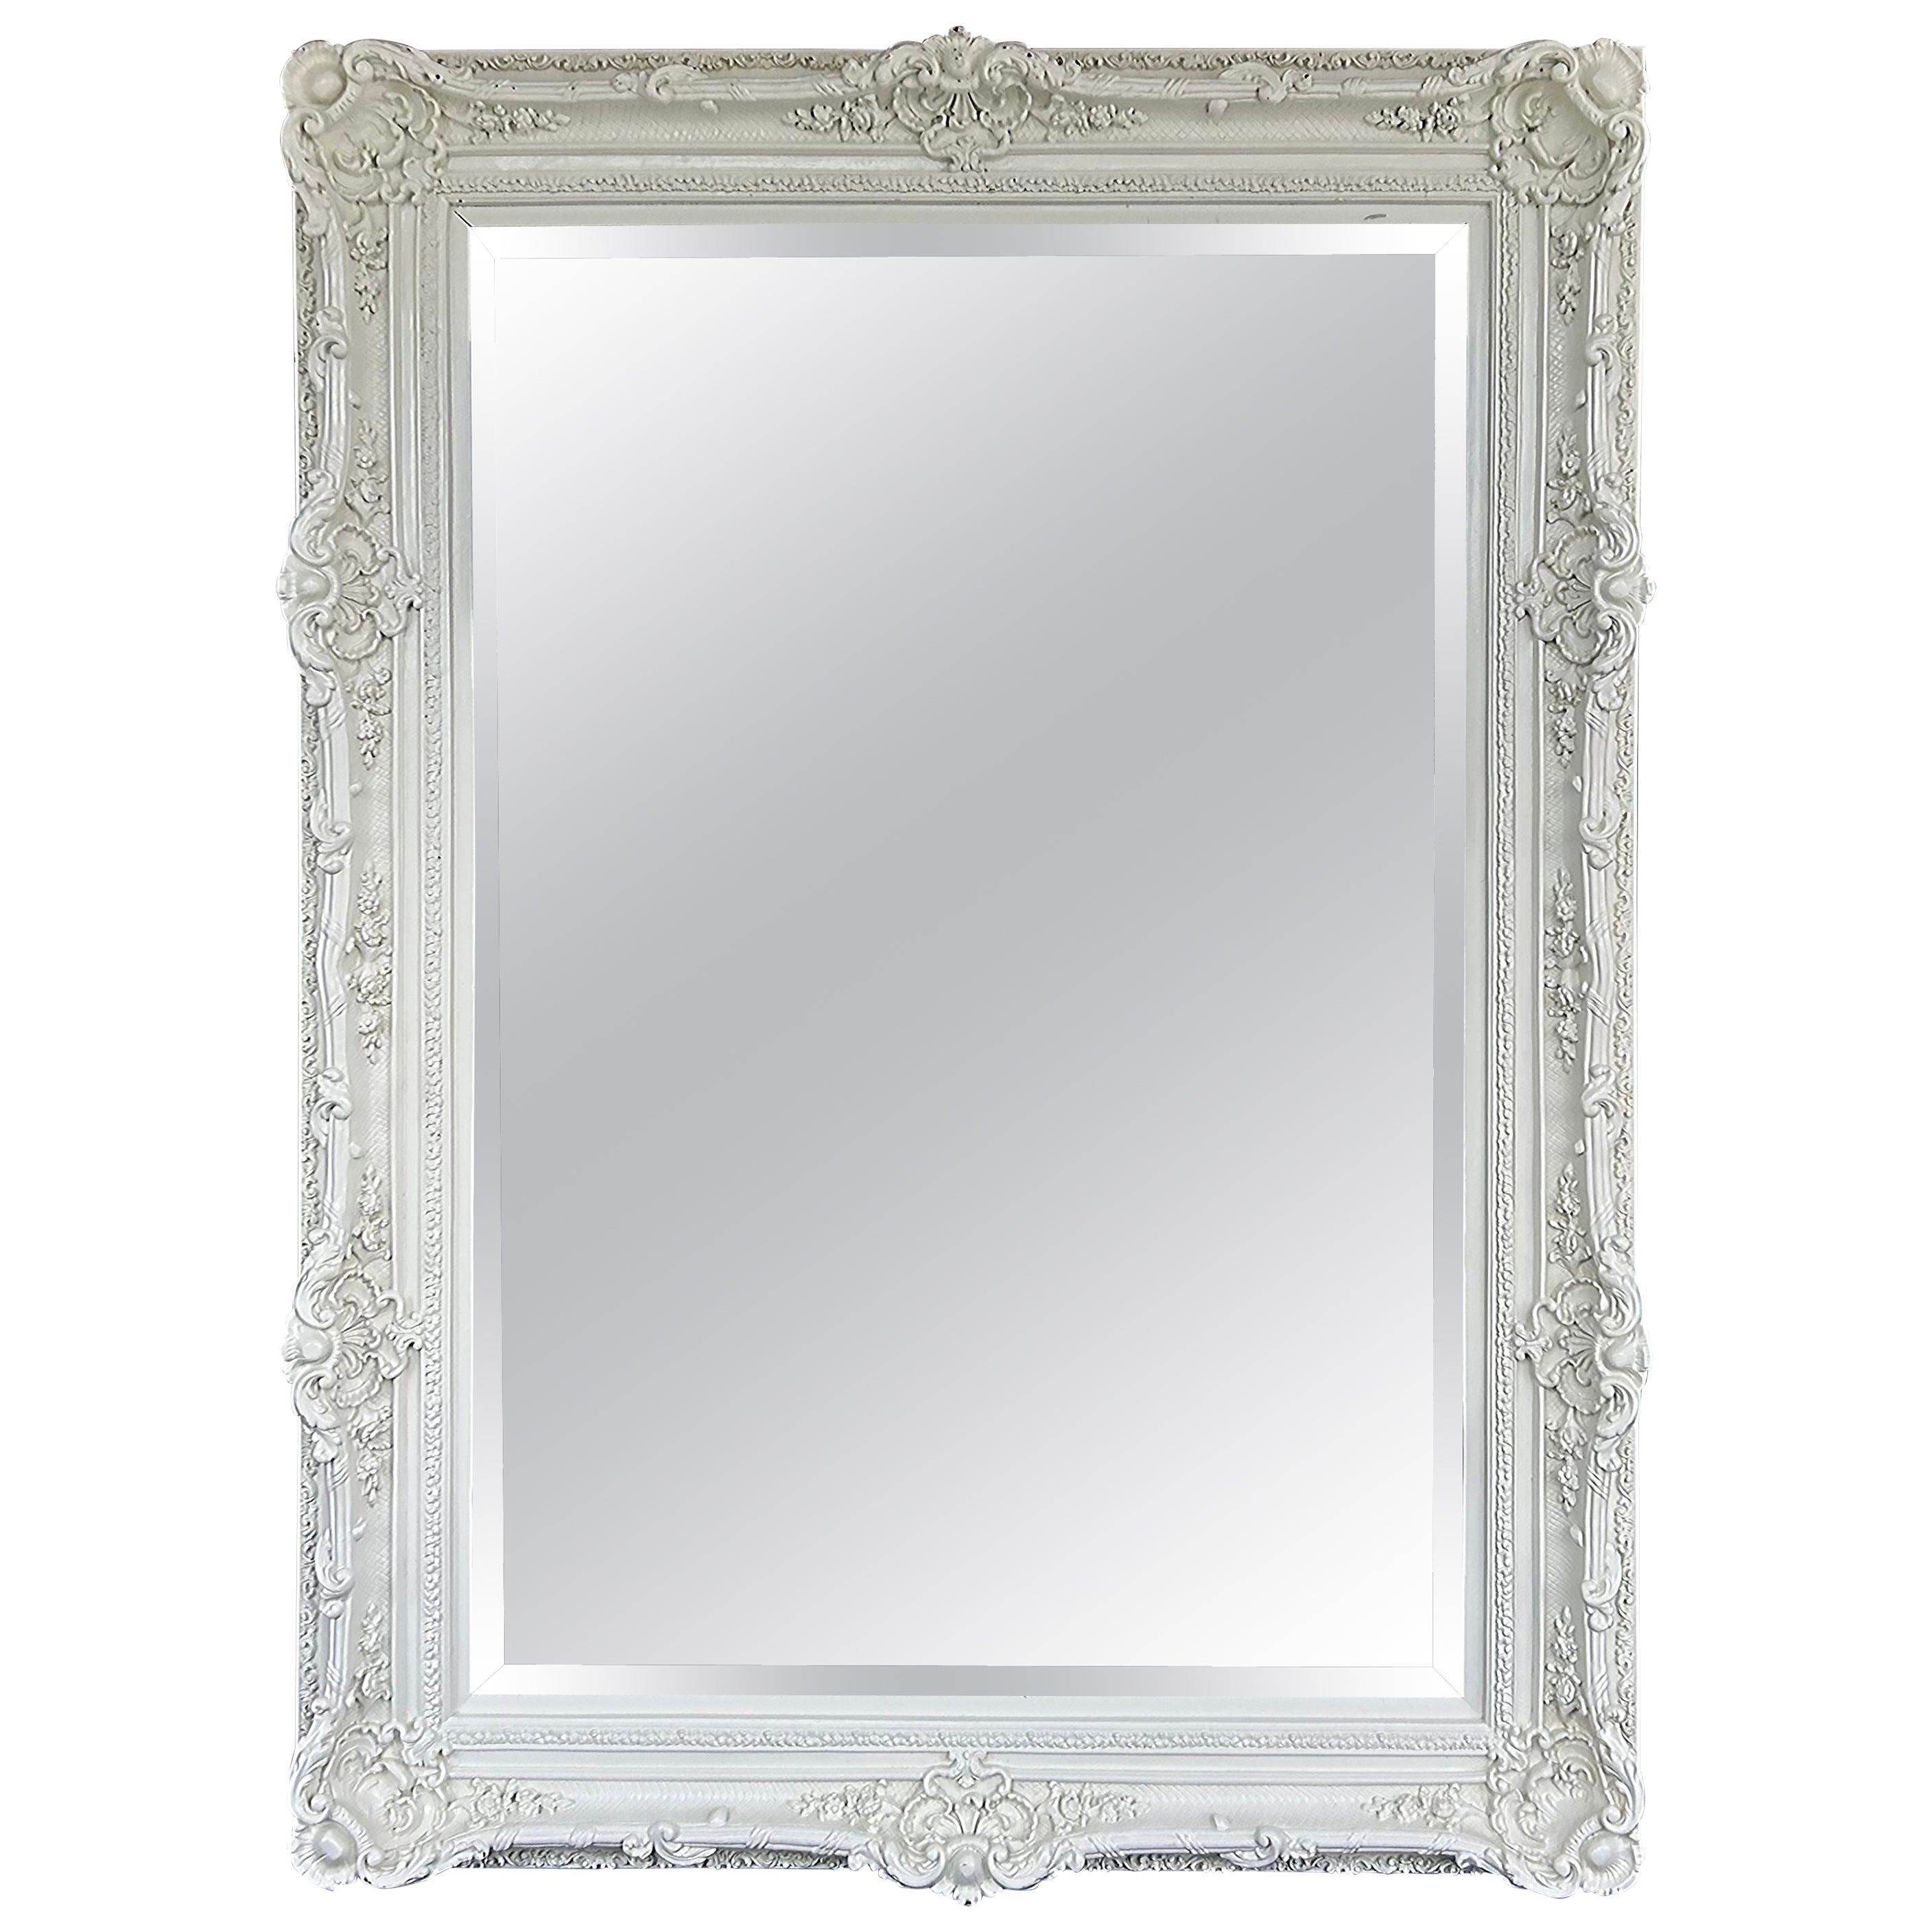 Monumental Shabby Chic Carved Wood Beveled Mirror Lacquered in White